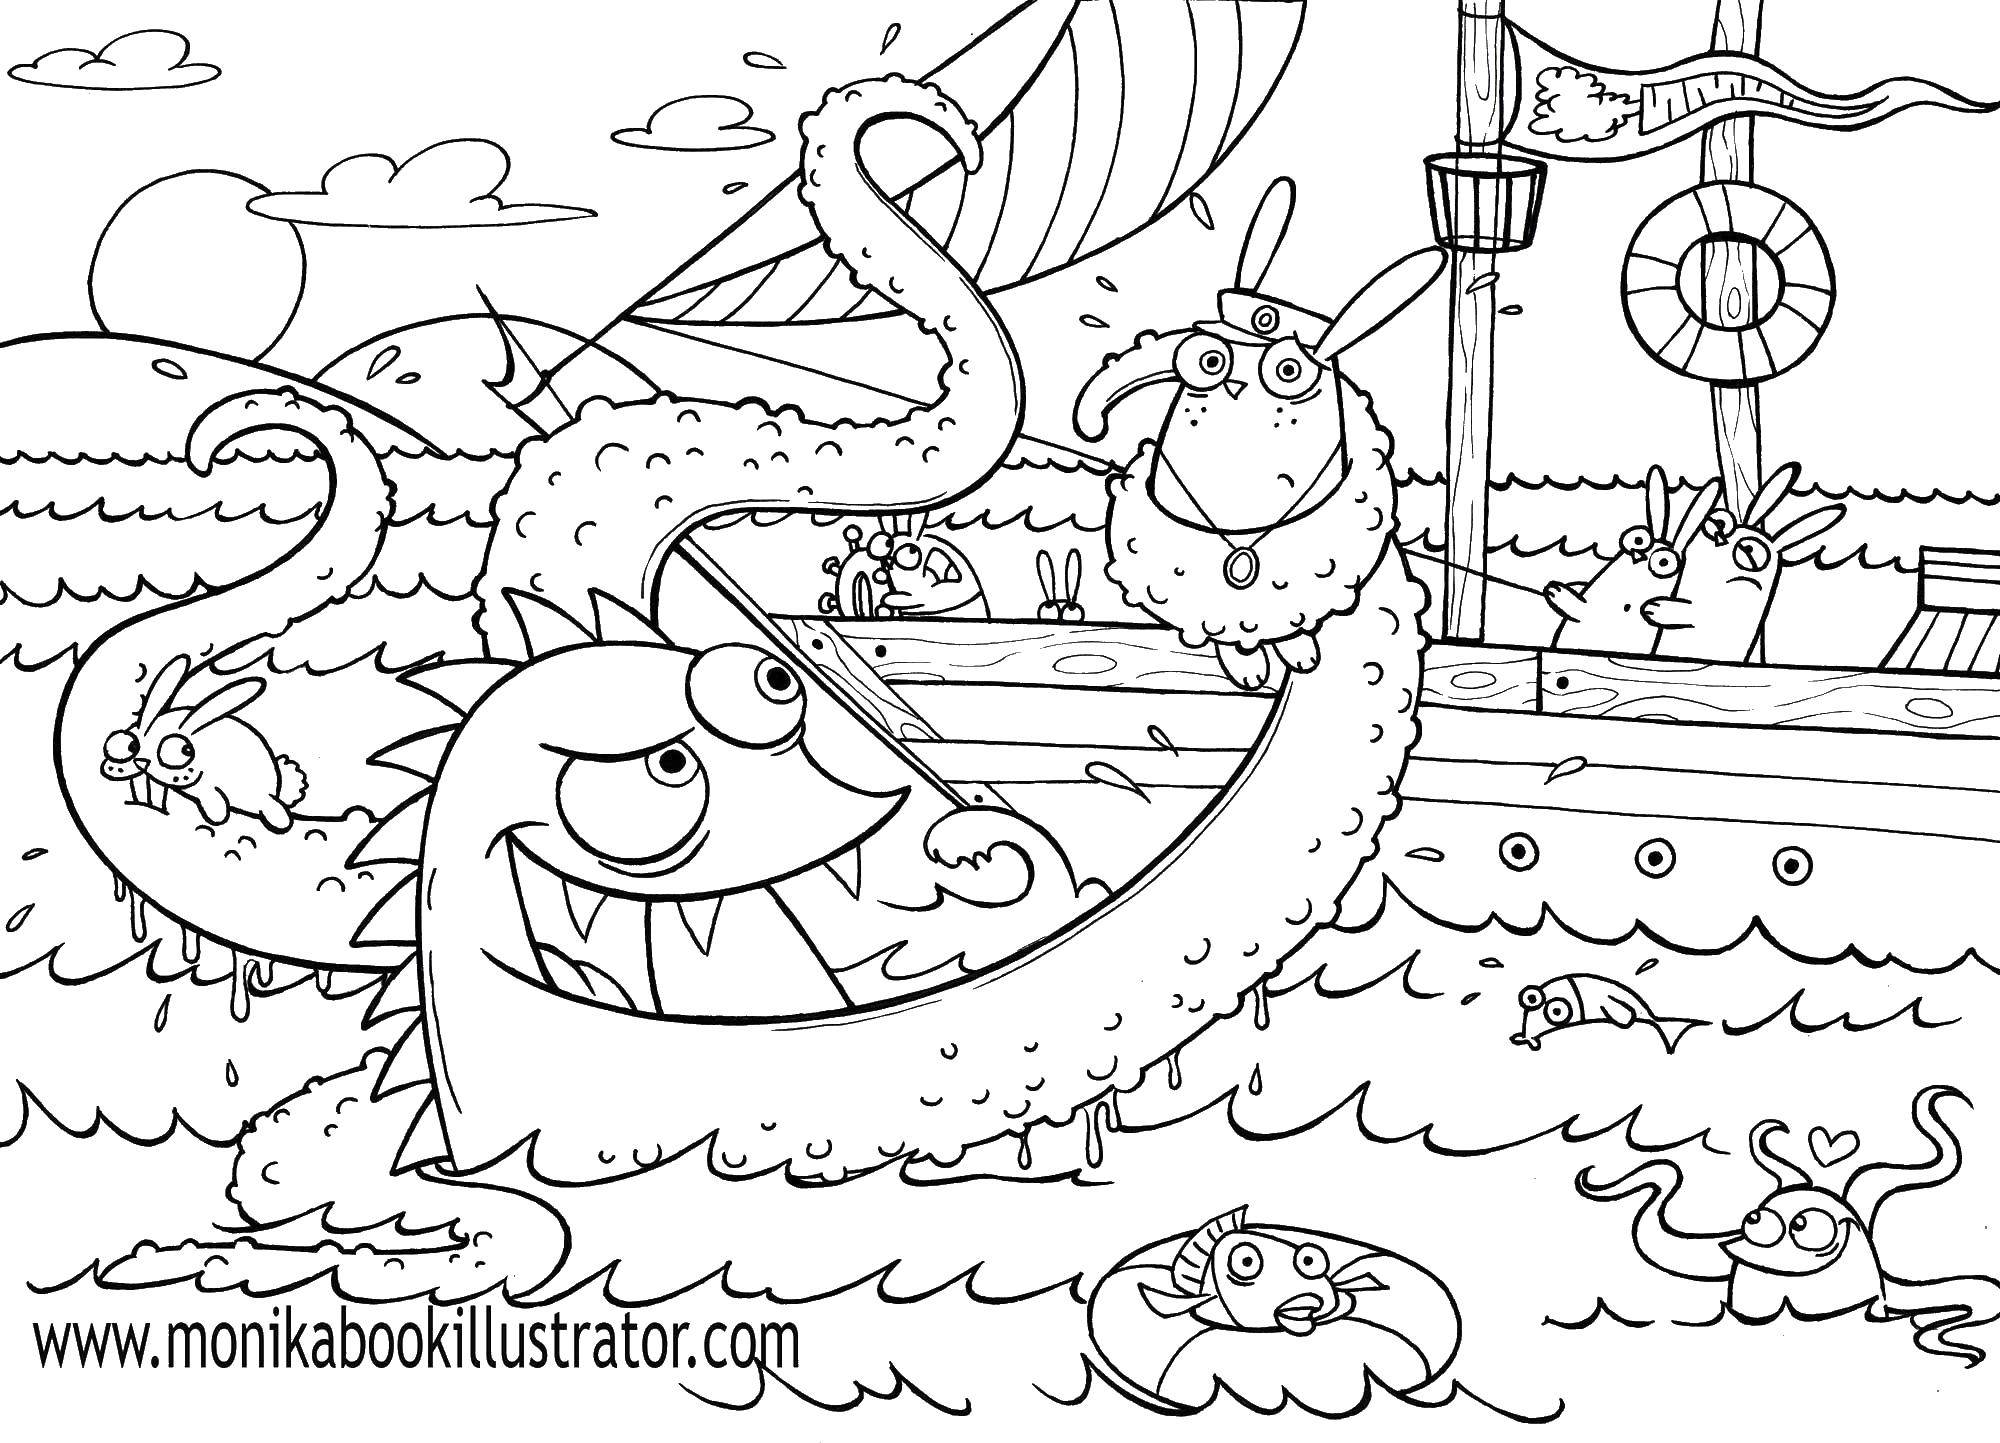 Coloring Attack of the octopus. Category Monsters. Tags:  Underwater world.